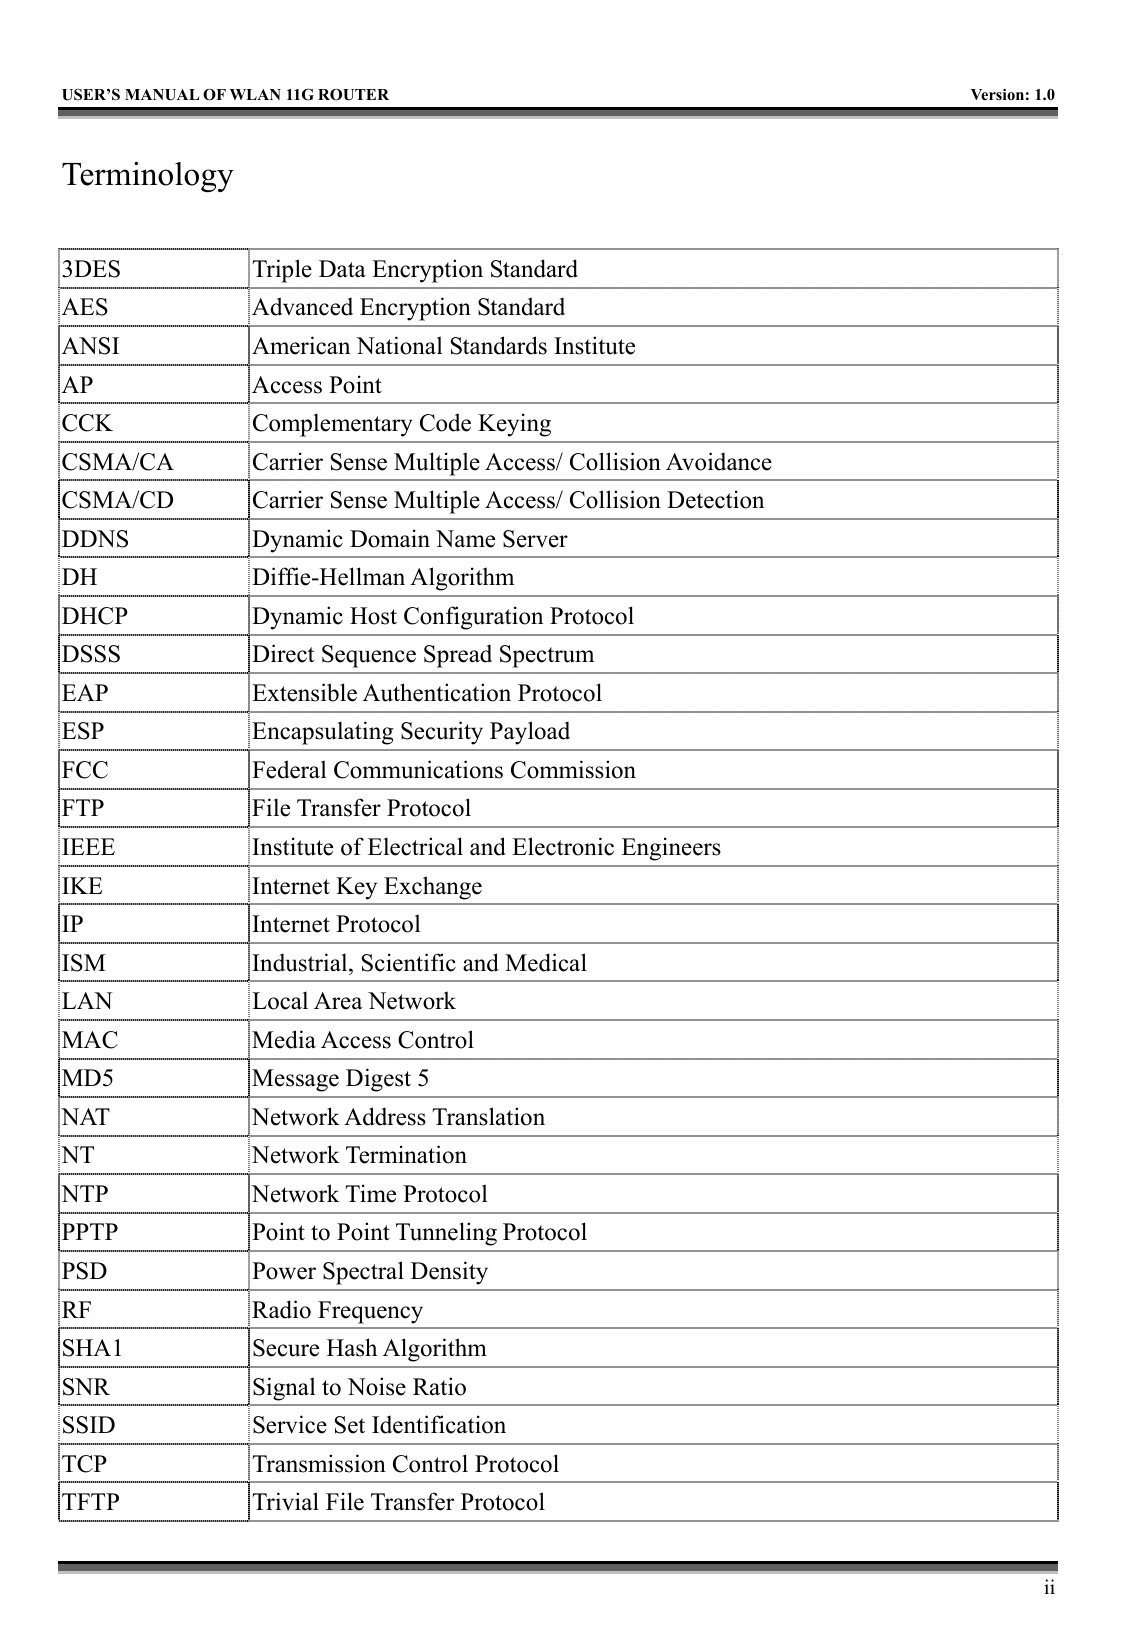   USER’S MANUAL OF WLAN 11G ROUTER    Version: 1.0     ii Terminology  3DES  Triple Data Encryption Standard AES  Advanced Encryption Standard ANSI  American National Standards Institute AP Access Point CCK  Complementary Code Keying CSMA/CA  Carrier Sense Multiple Access/ Collision Avoidance CSMA/CD  Carrier Sense Multiple Access/ Collision Detection DDNS  Dynamic Domain Name Server DH Diffie-Hellman Algorithm DHCP  Dynamic Host Configuration Protocol DSSS  Direct Sequence Spread Spectrum EAP Extensible Authentication Protocol ESP  Encapsulating Security Payload FCC  Federal Communications Commission FTP File Transfer Protocol IEEE  Institute of Electrical and Electronic Engineers IKE  Internet Key Exchange IP Internet Protocol ISM  Industrial, Scientific and Medical LAN Local Area Network MAC Media Access Control MD5  Message Digest 5 NAT Network Address Translation NT Network Termination NTP Network Time Protocol PPTP  Point to Point Tunneling Protocol PSD  Power Spectral Density RF Radio Frequency SHA1 Secure Hash Algorithm SNR  Signal to Noise Ratio SSID  Service Set Identification TCP  Transmission Control Protocol TFTP  Trivial File Transfer Protocol 